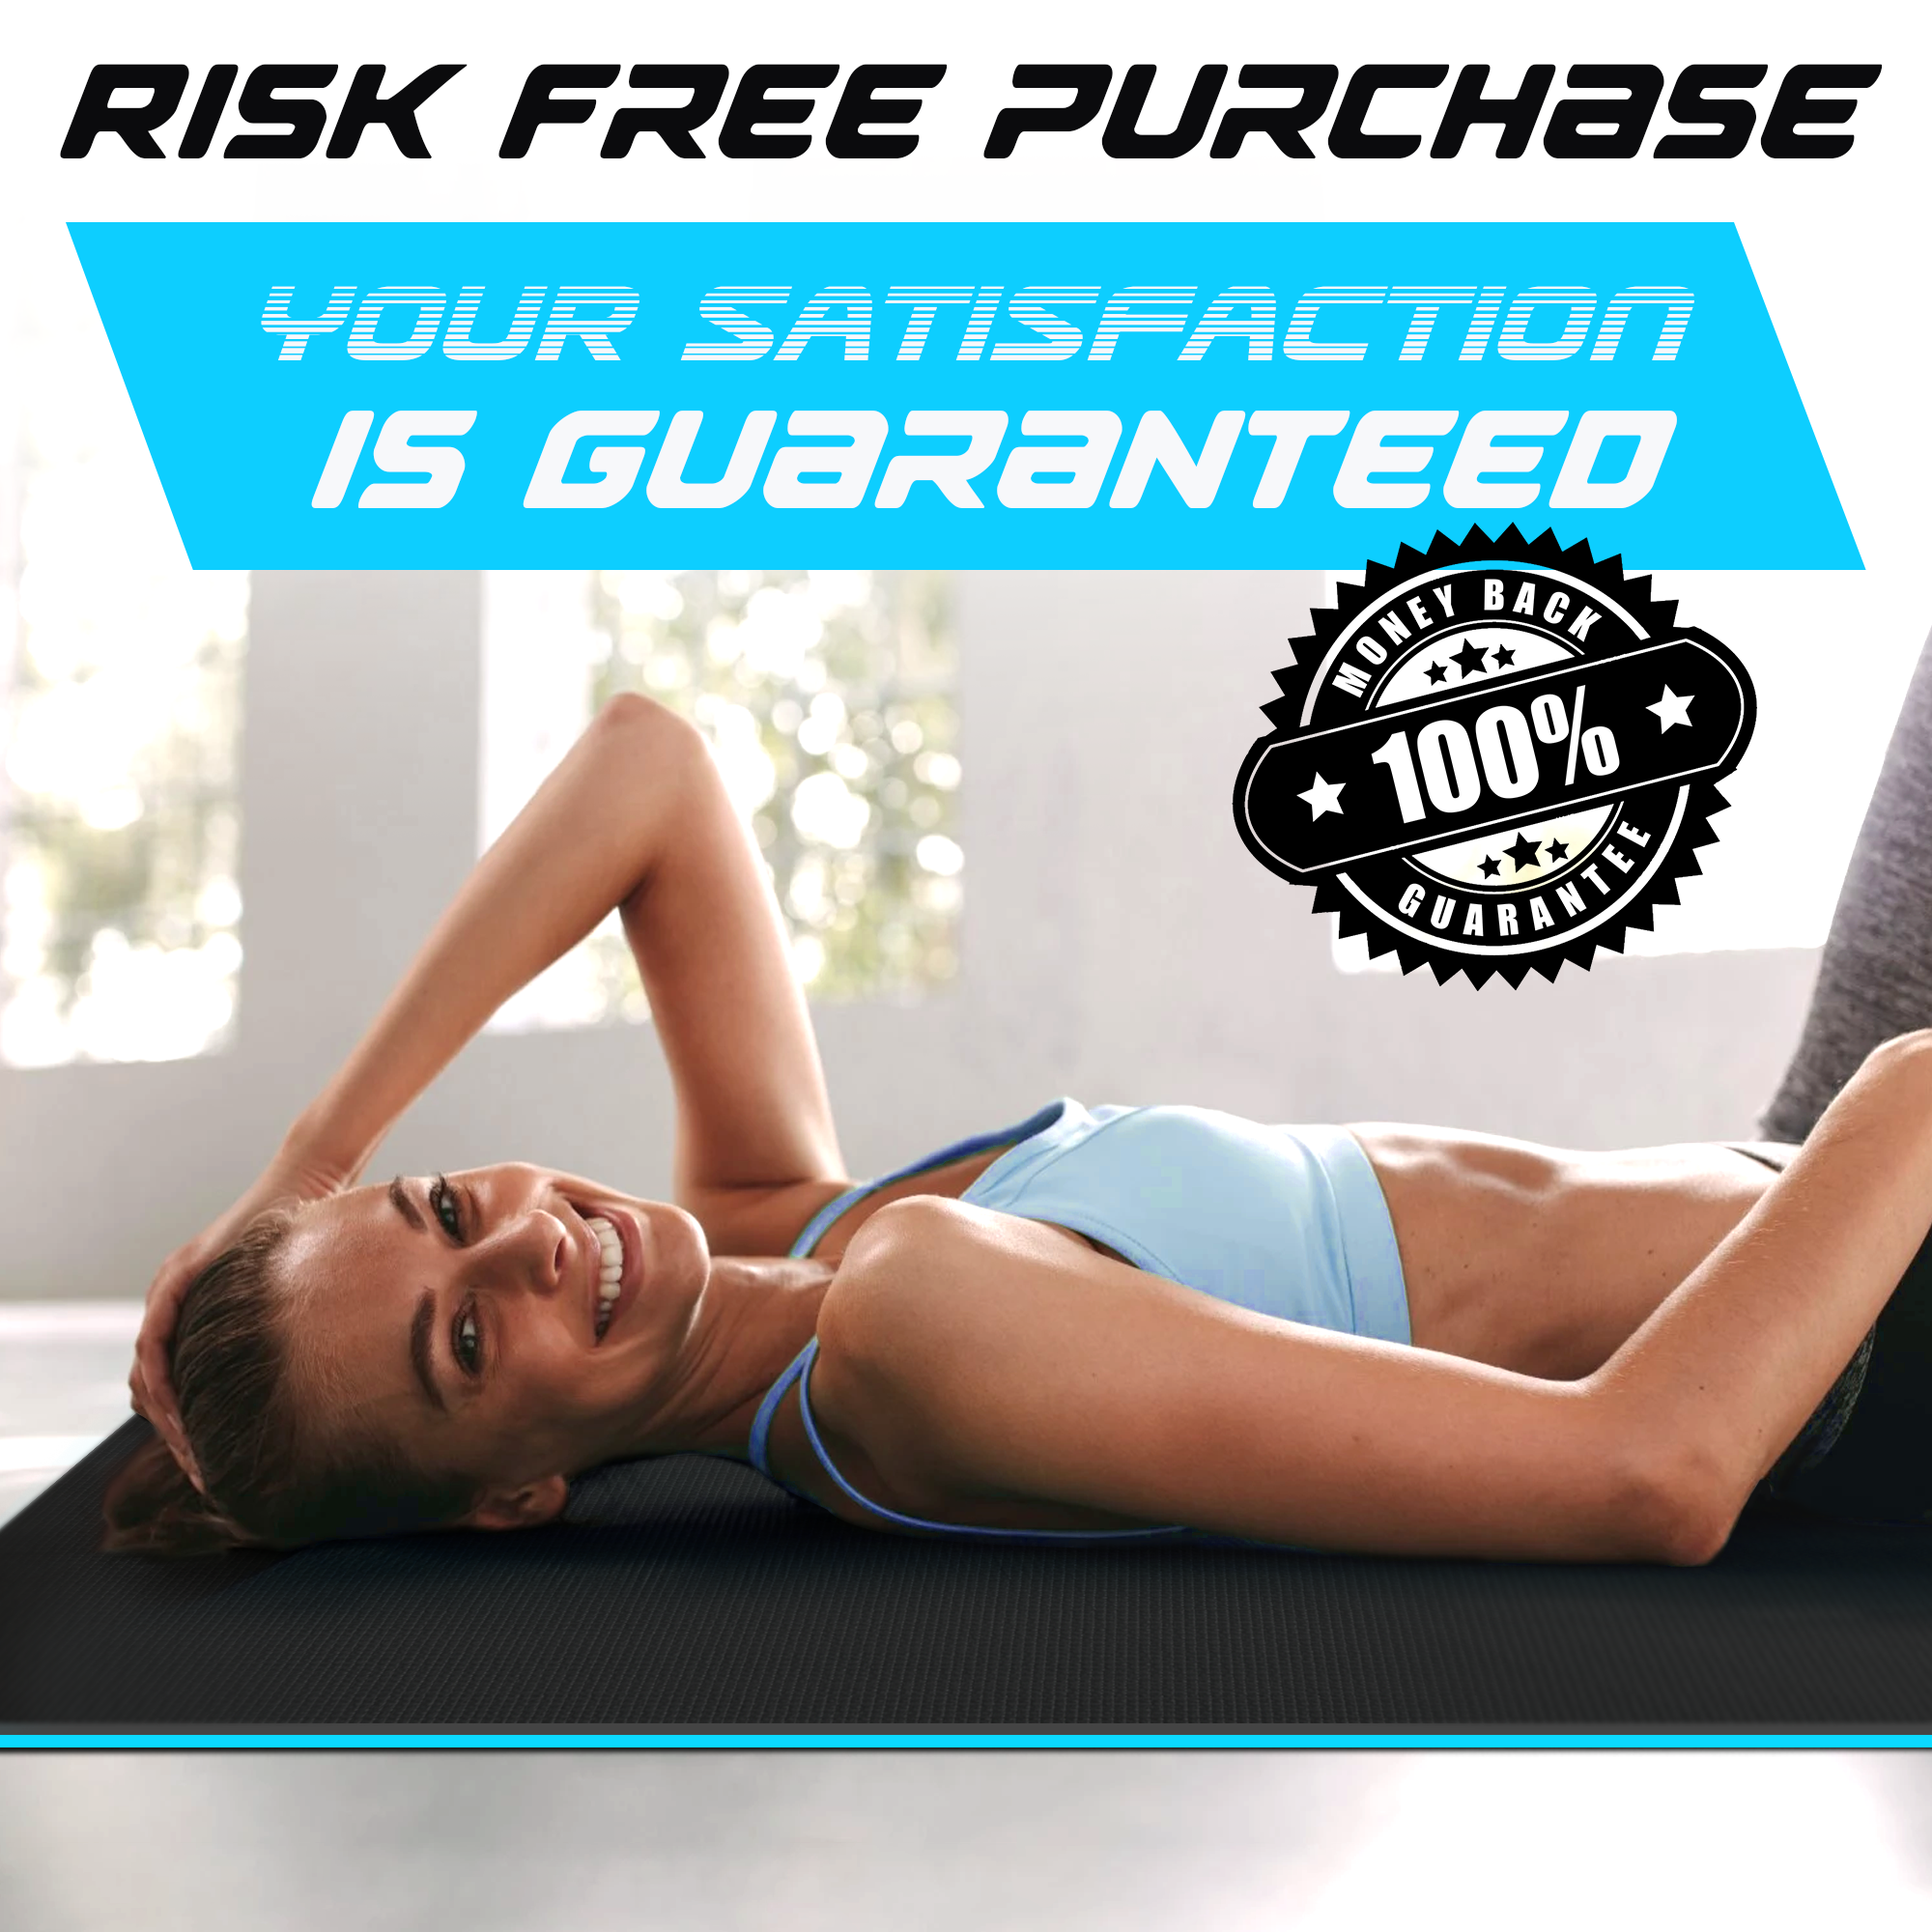 High Quality Large Exercise Mats by Sensu